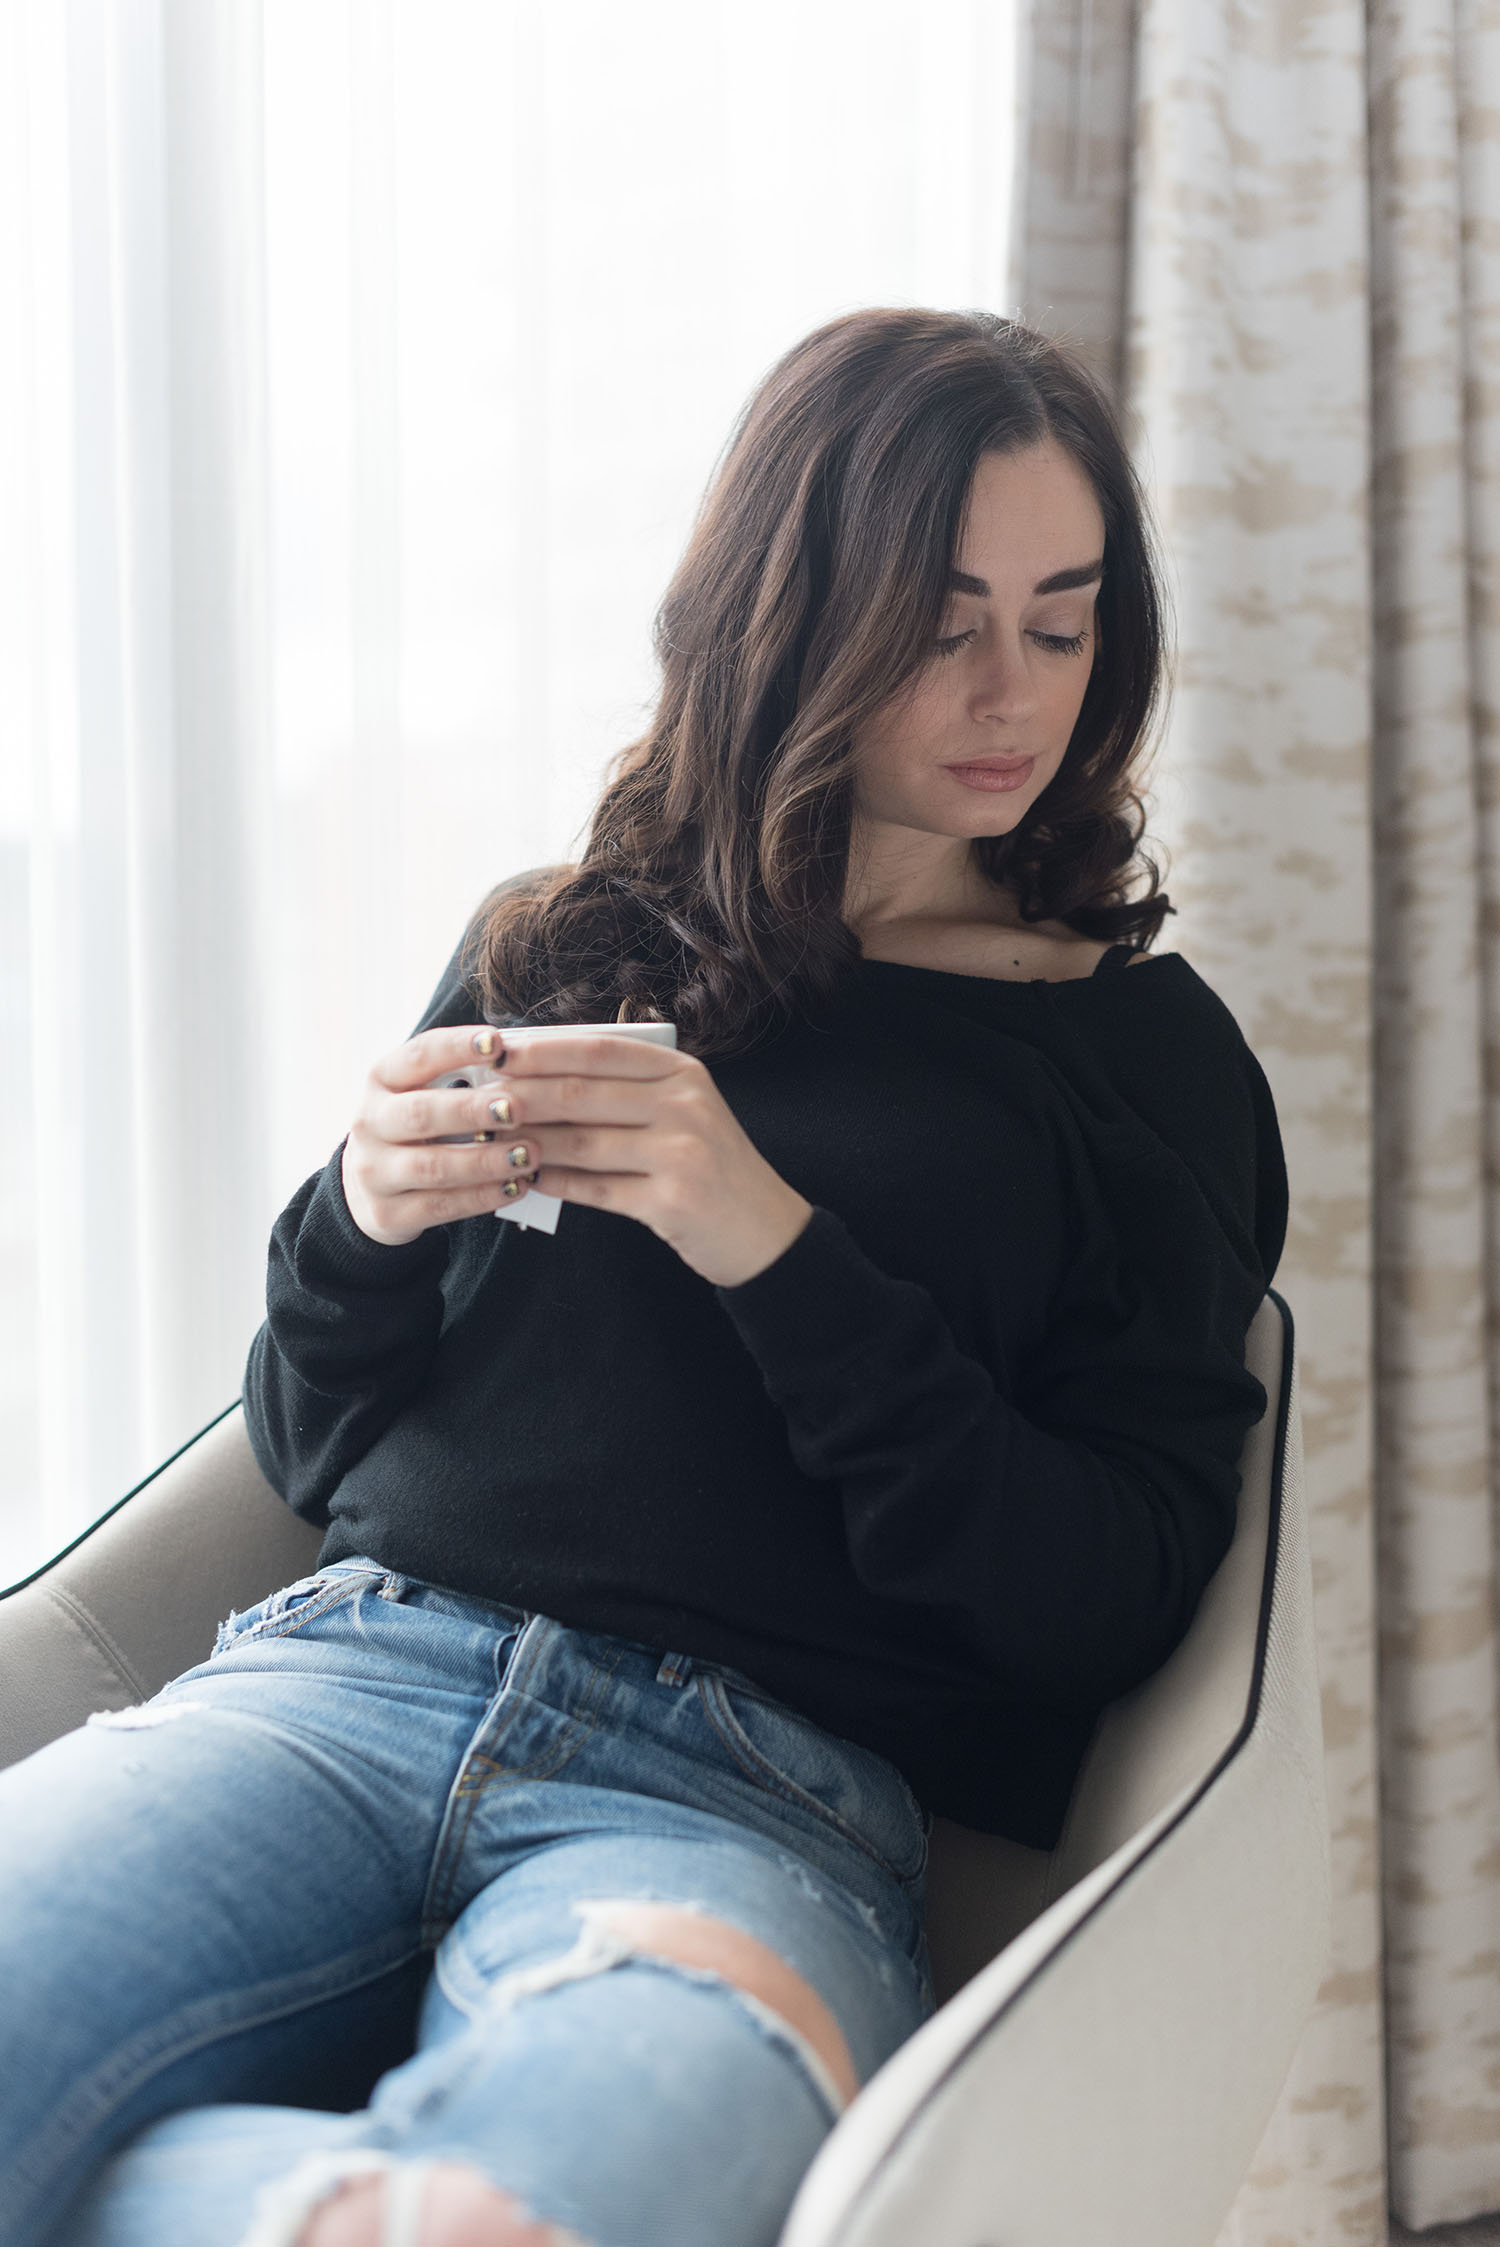 Portrait of fashion blogger Cee Fardoe of Coco & Vera at the JW Marriott Hotel in Vancouver, wearing an ASOS black sweater and Grlfrnd Karolina jeans